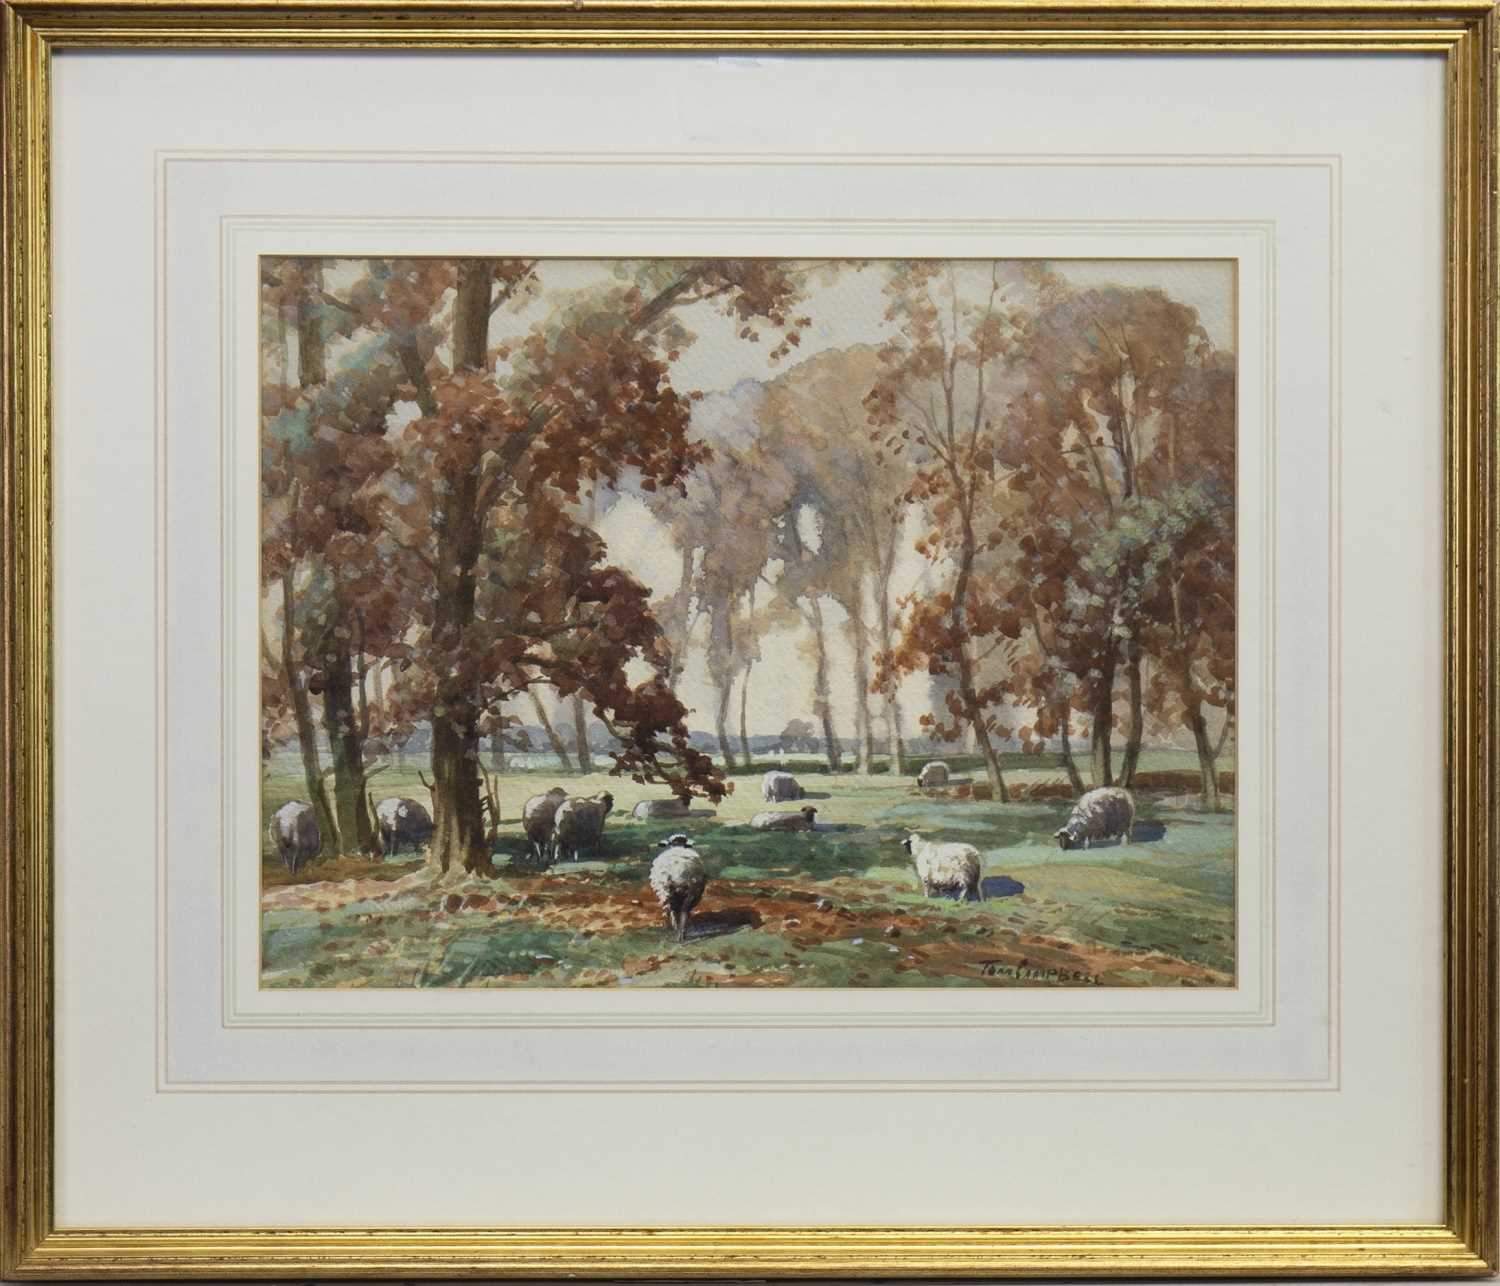 Lot 404 - SHEEP GRAZING IN WOODLANDS, A WATERCOLOUR BY TOM CAMPBELL